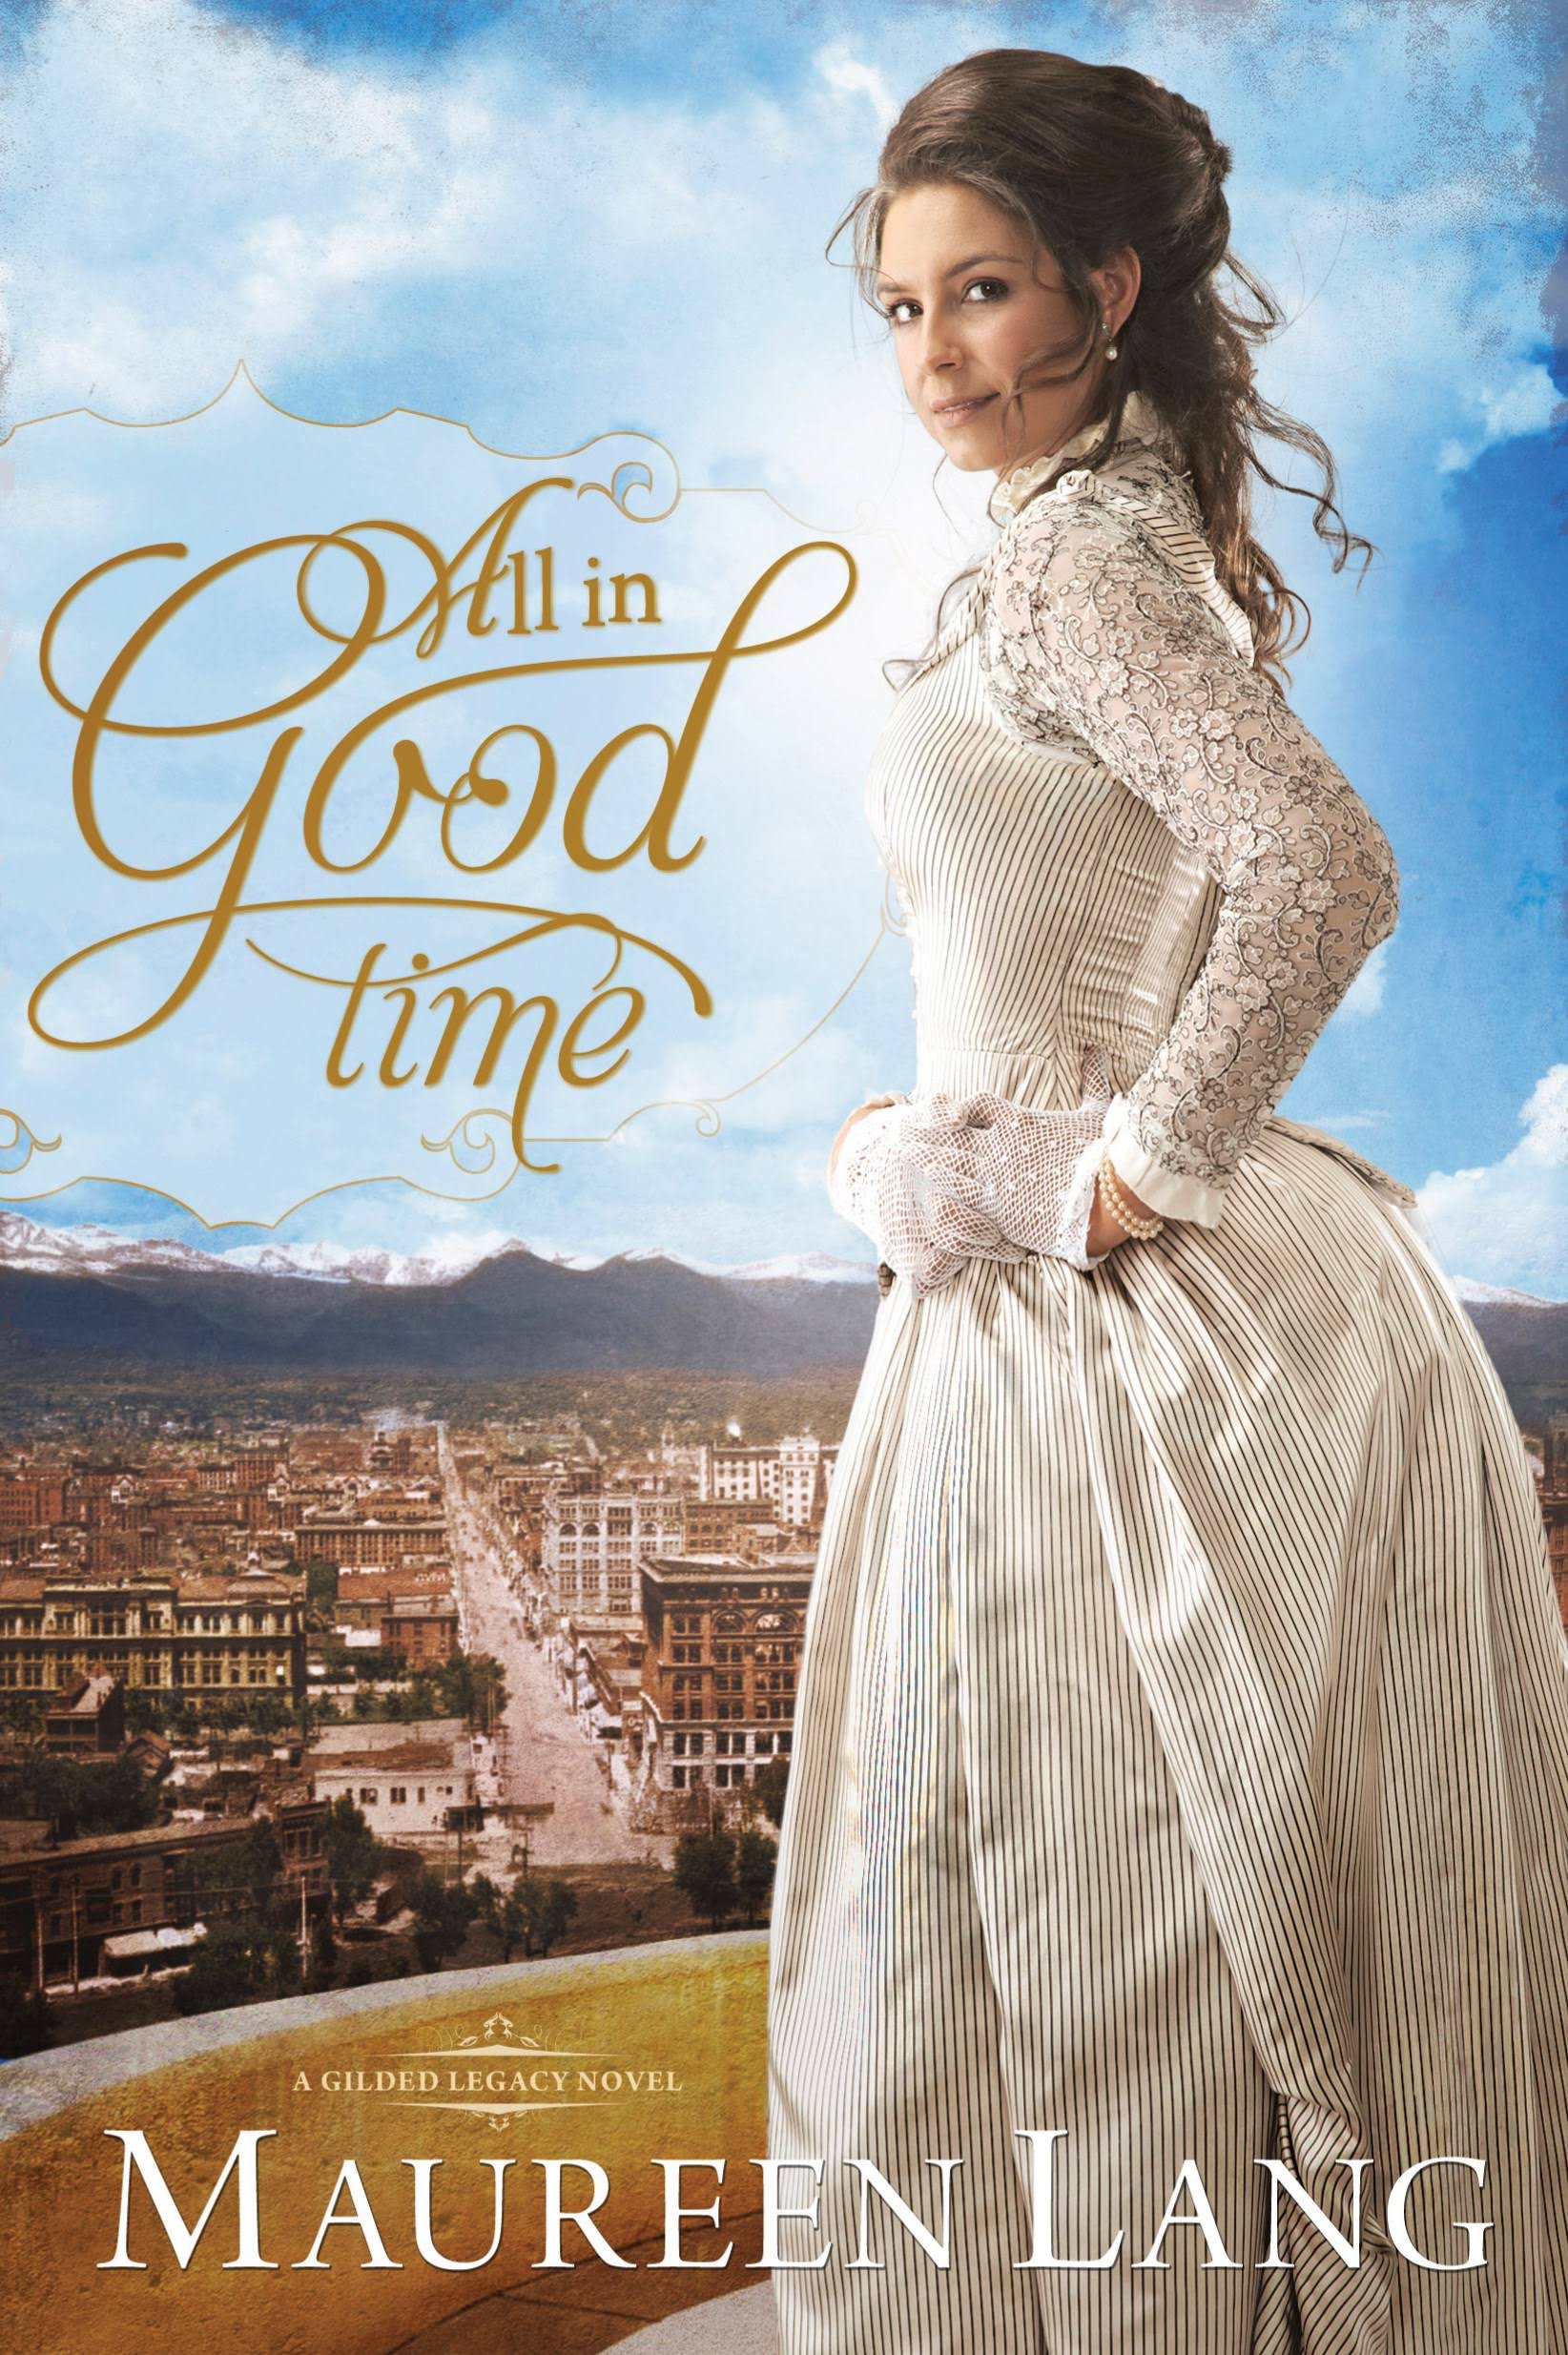 All in Good Time [Book]